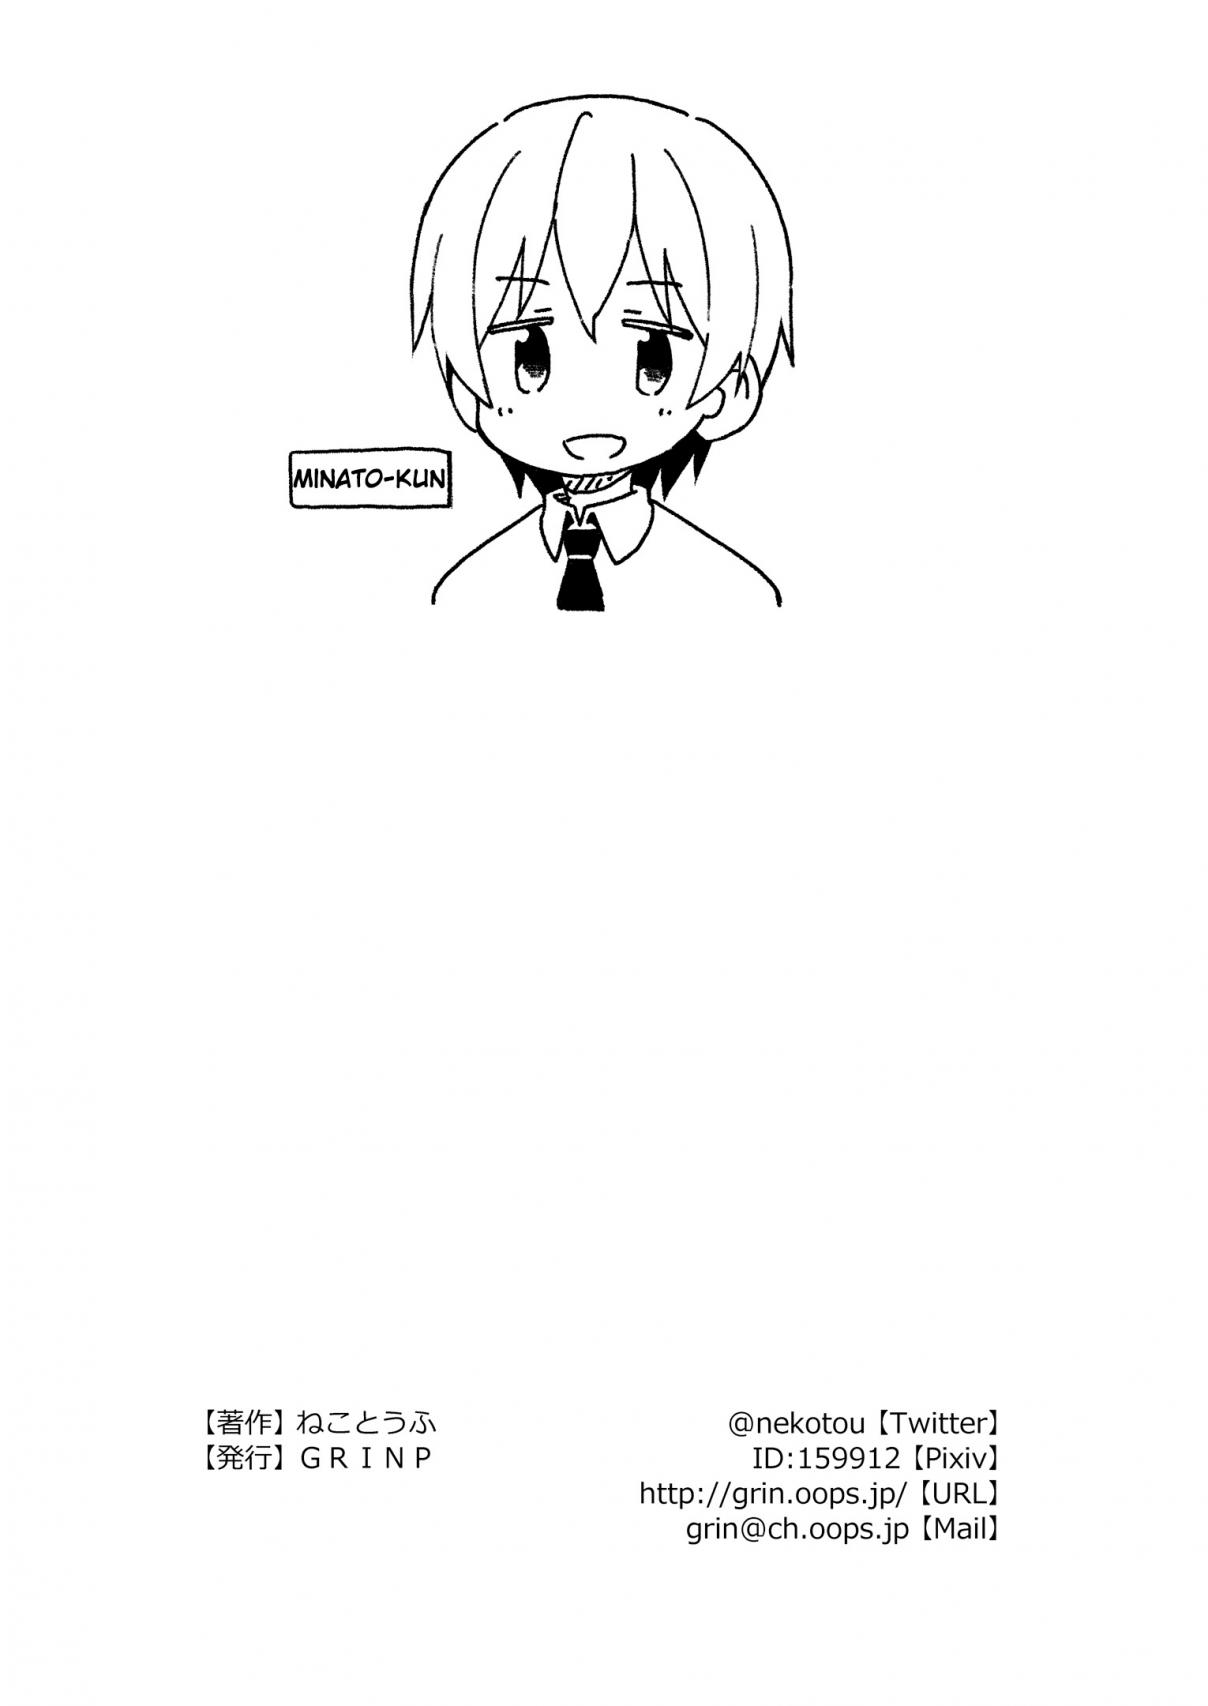 Onii chan is Done For! Vol. 4 Ch. 37.5 [TEMP 2]34.5 & 36.5 & Mini Extra (6 of 10)